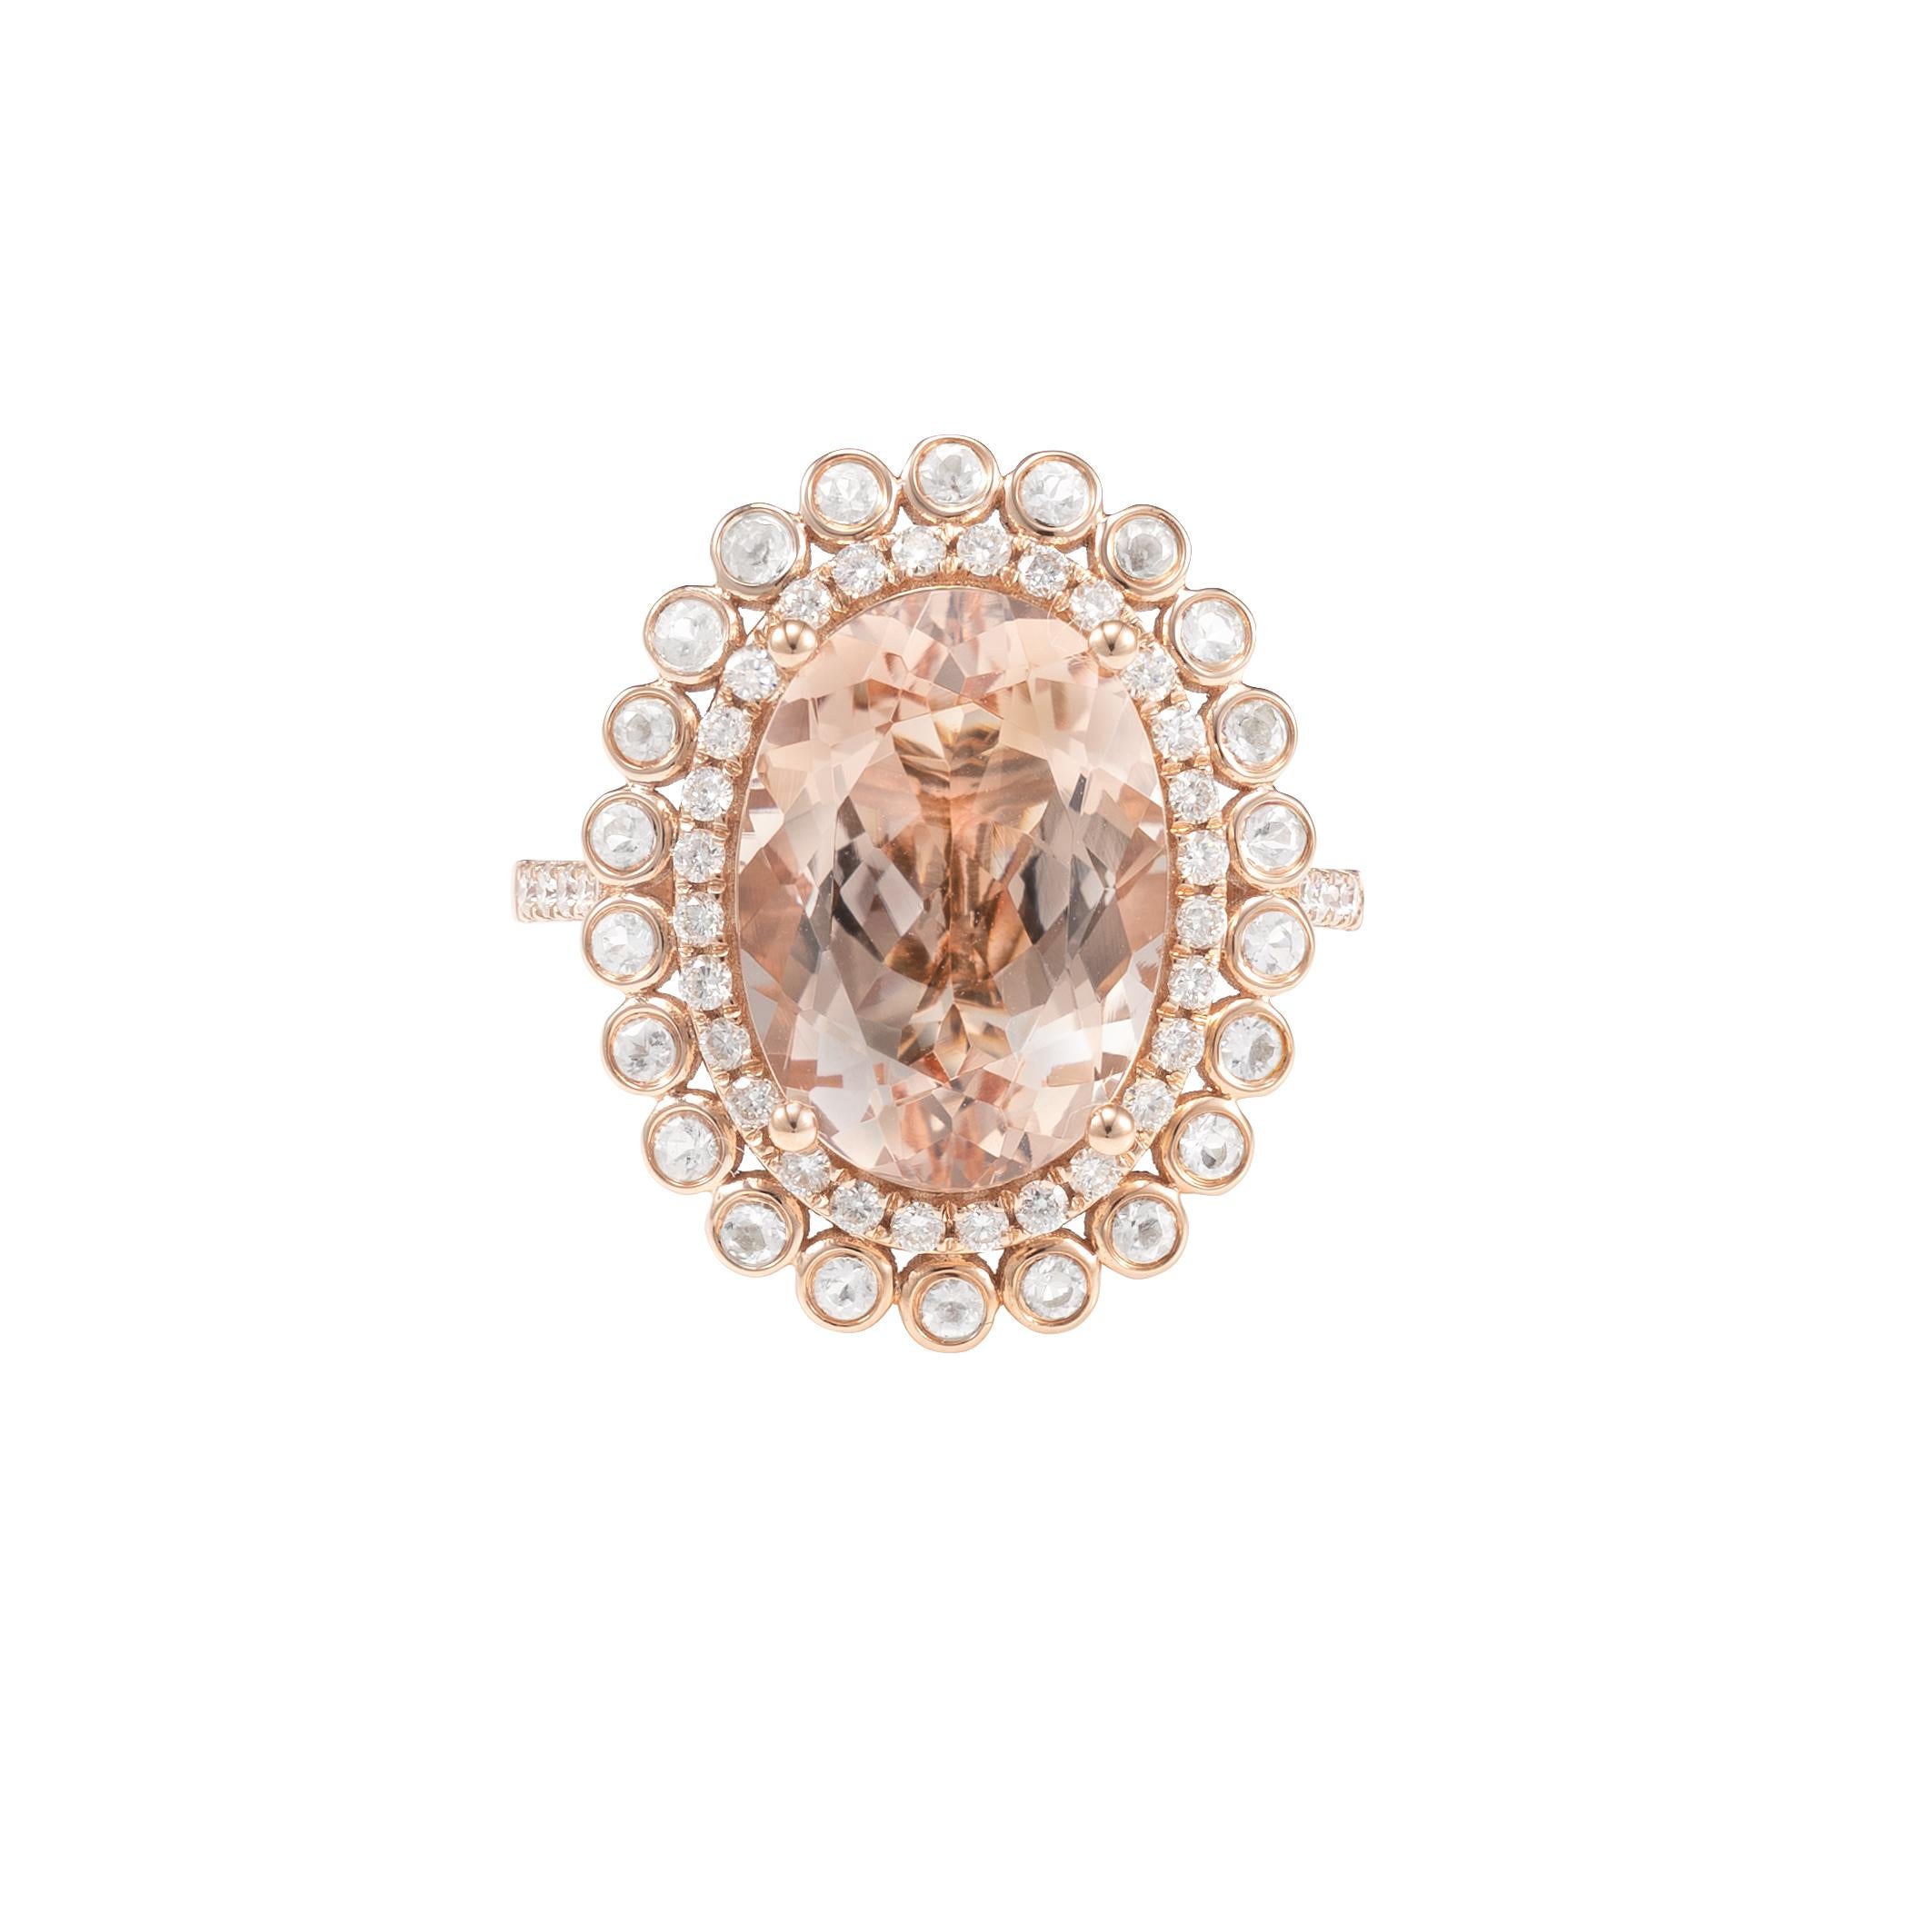 Oval Cut 5.2 Carat Morganite and Diamond Ring in 18 Karat Rose Gold For Sale